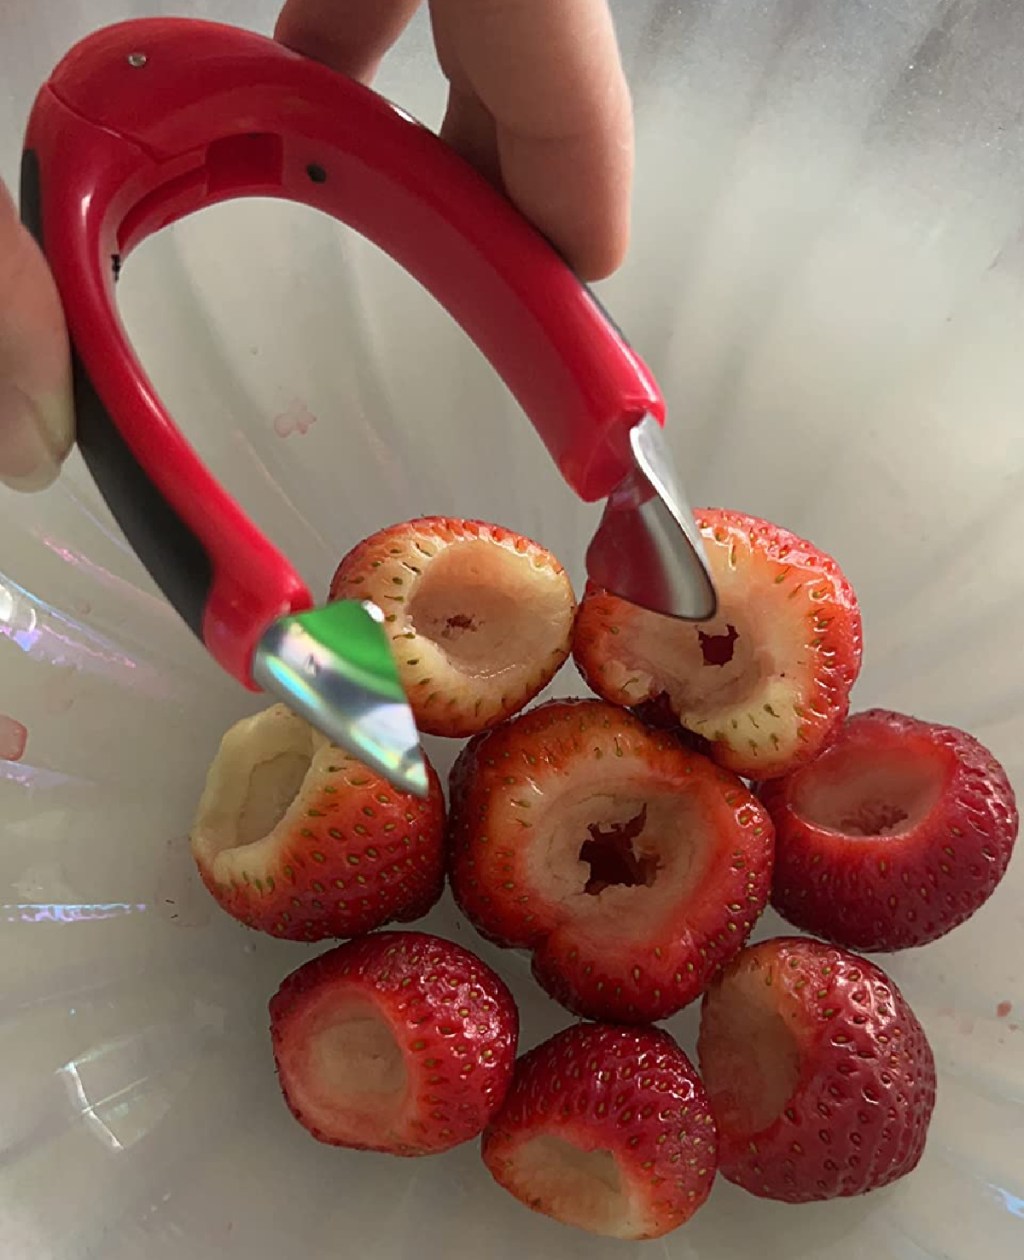 cool kitchen gadgets - strawberry huller from amazon